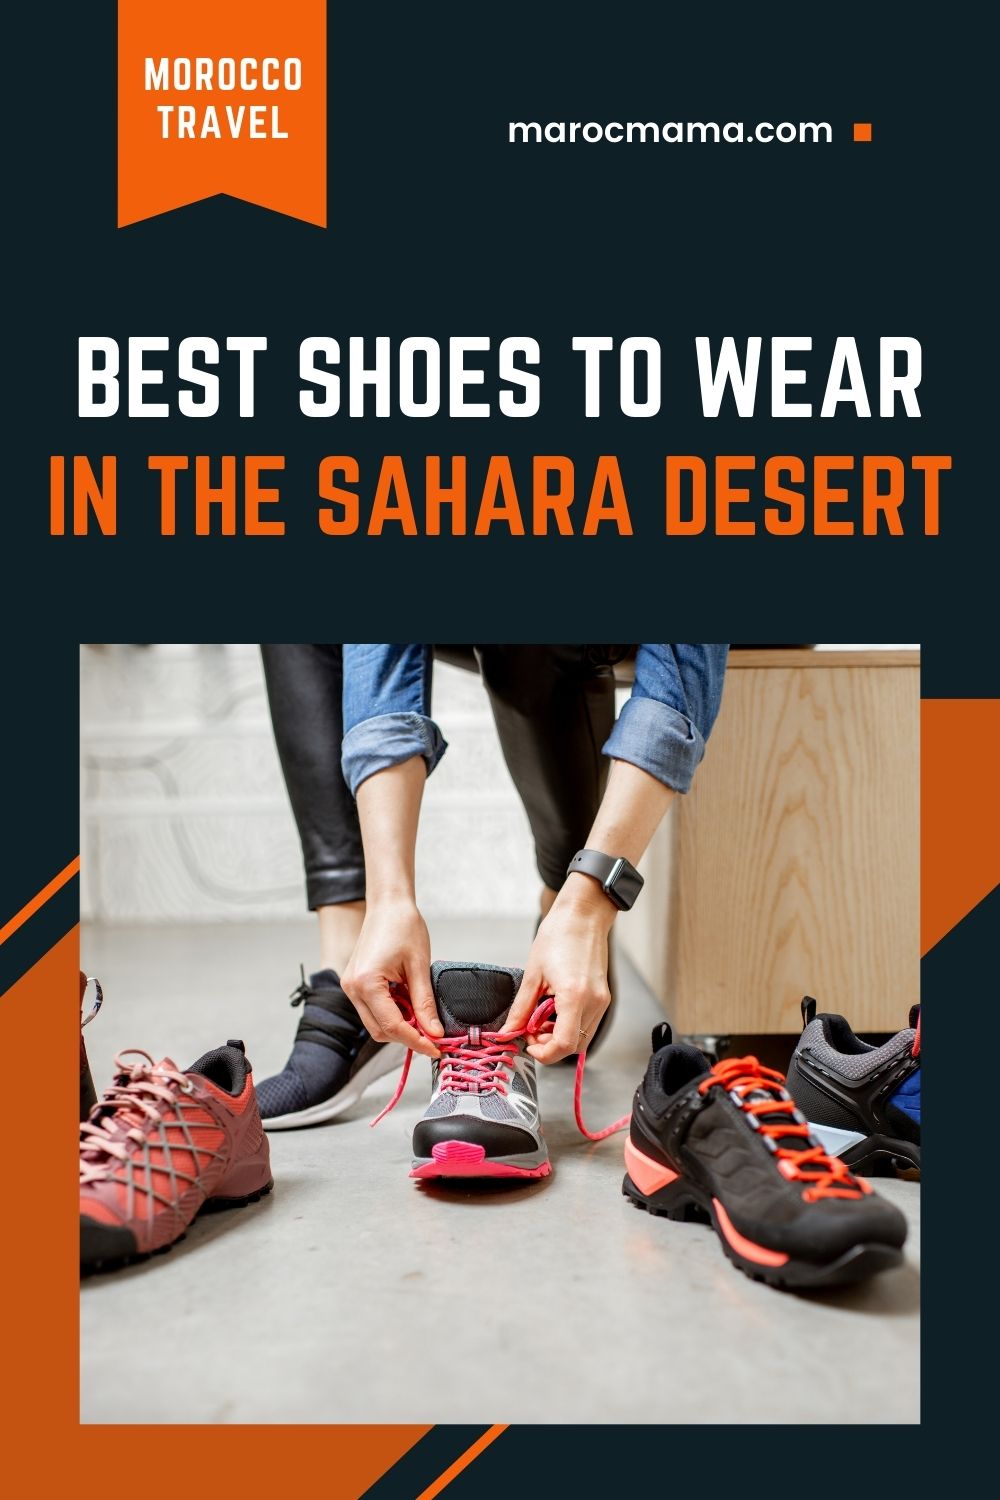 Woman trying different shoes for hiking in a sports shop with the text Best shoes to wear in the Sahara desert